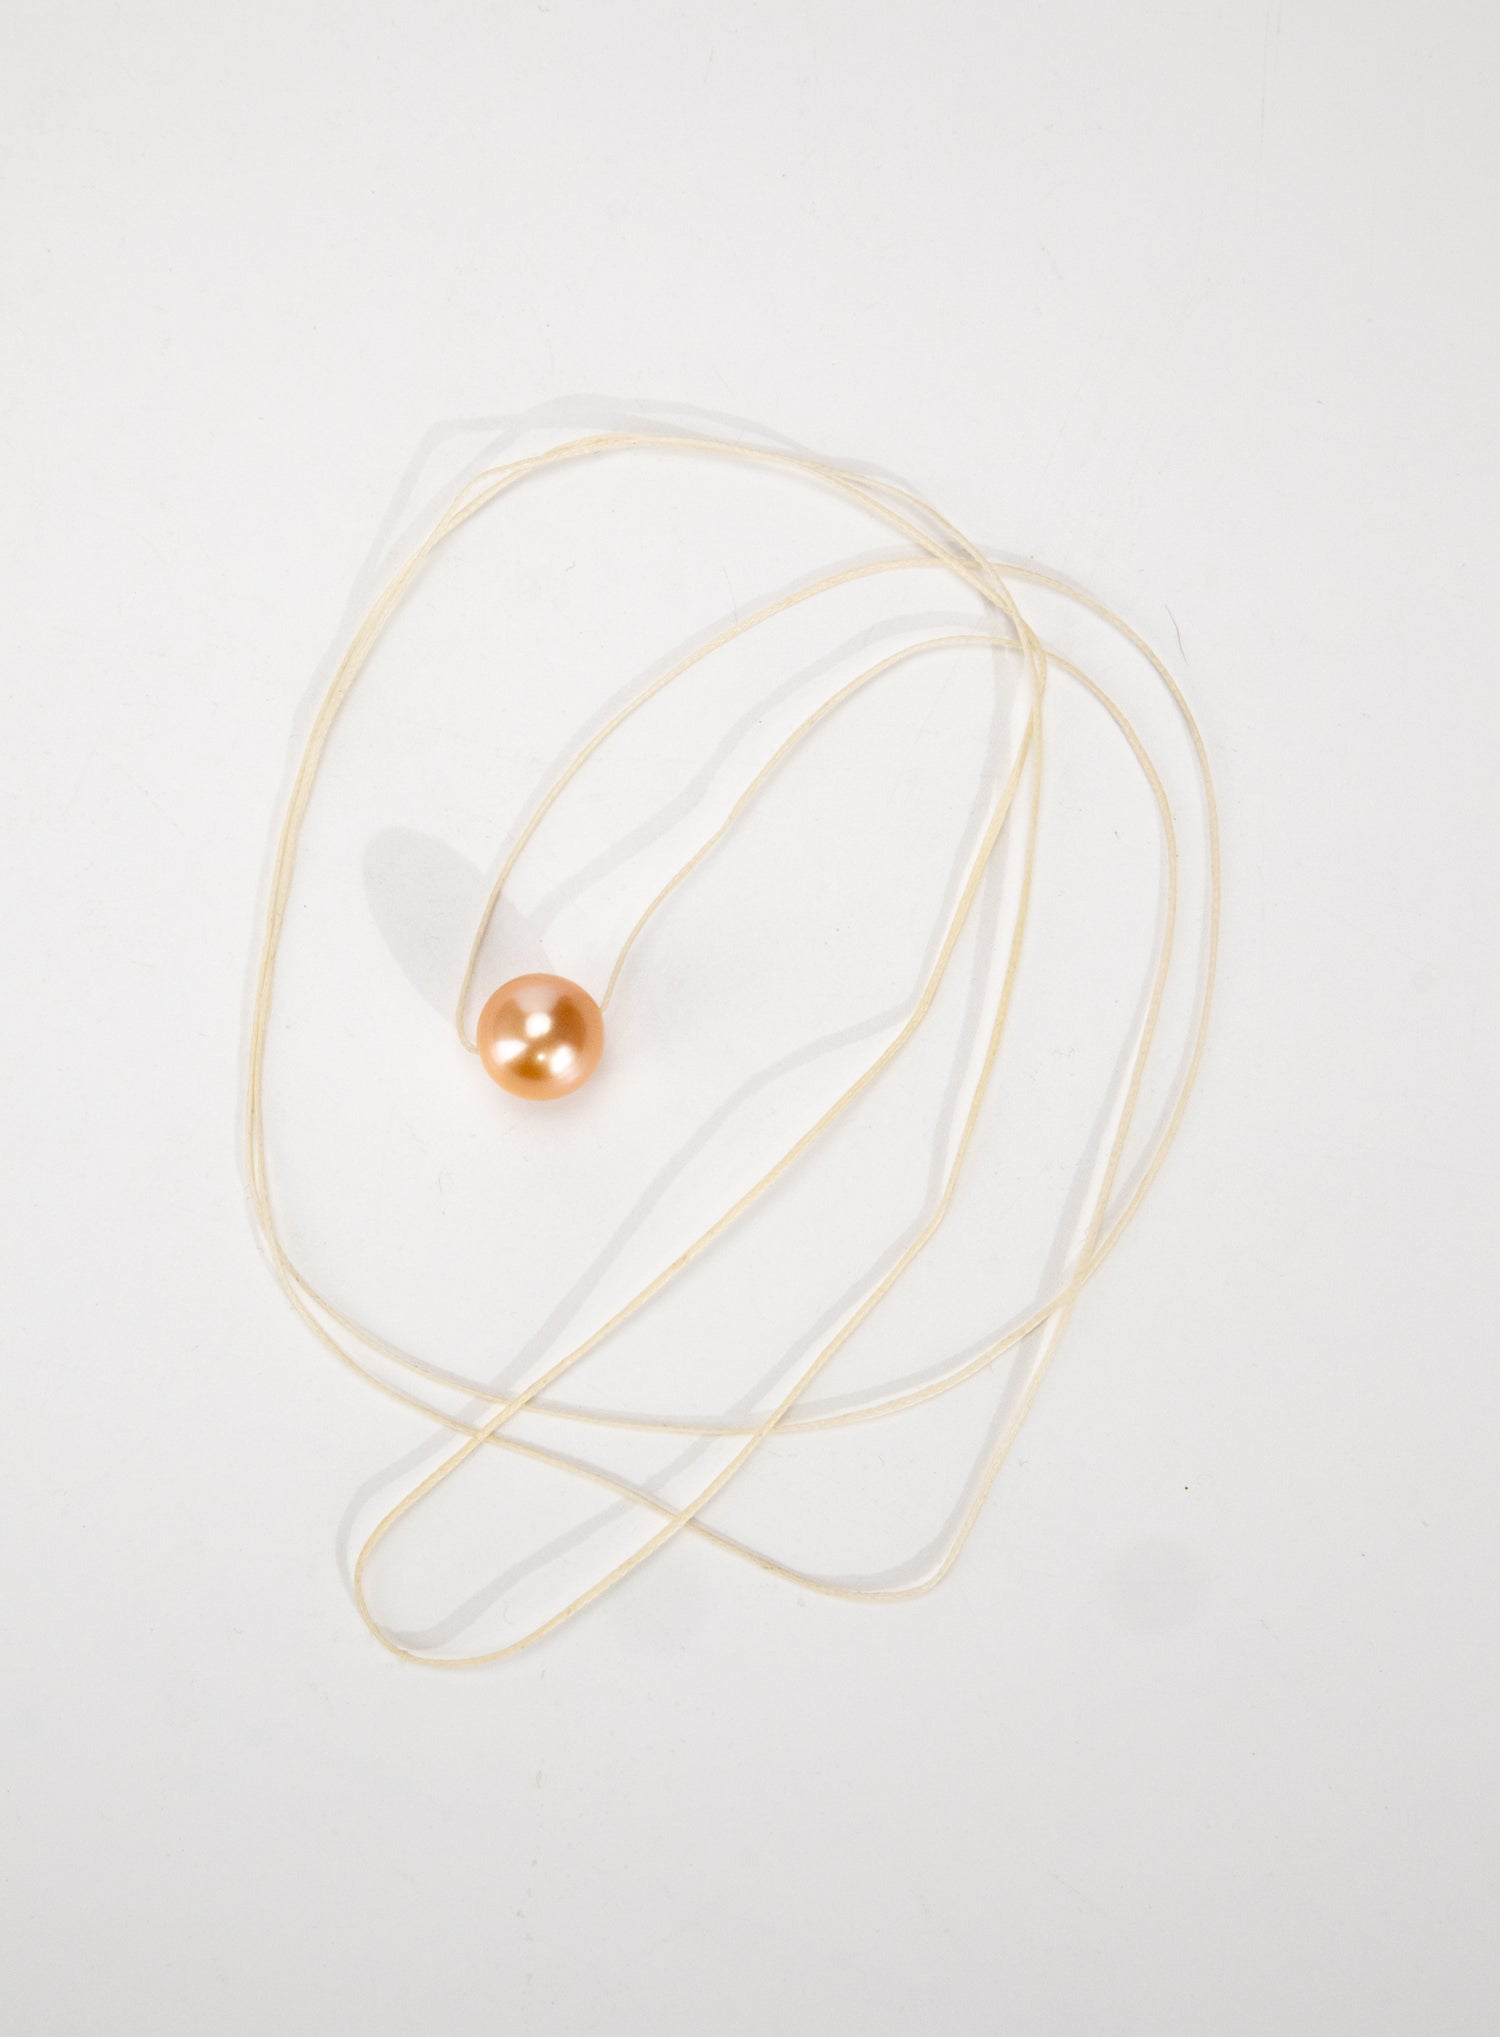 For Mum, you are a real pearl - Peach Necklace